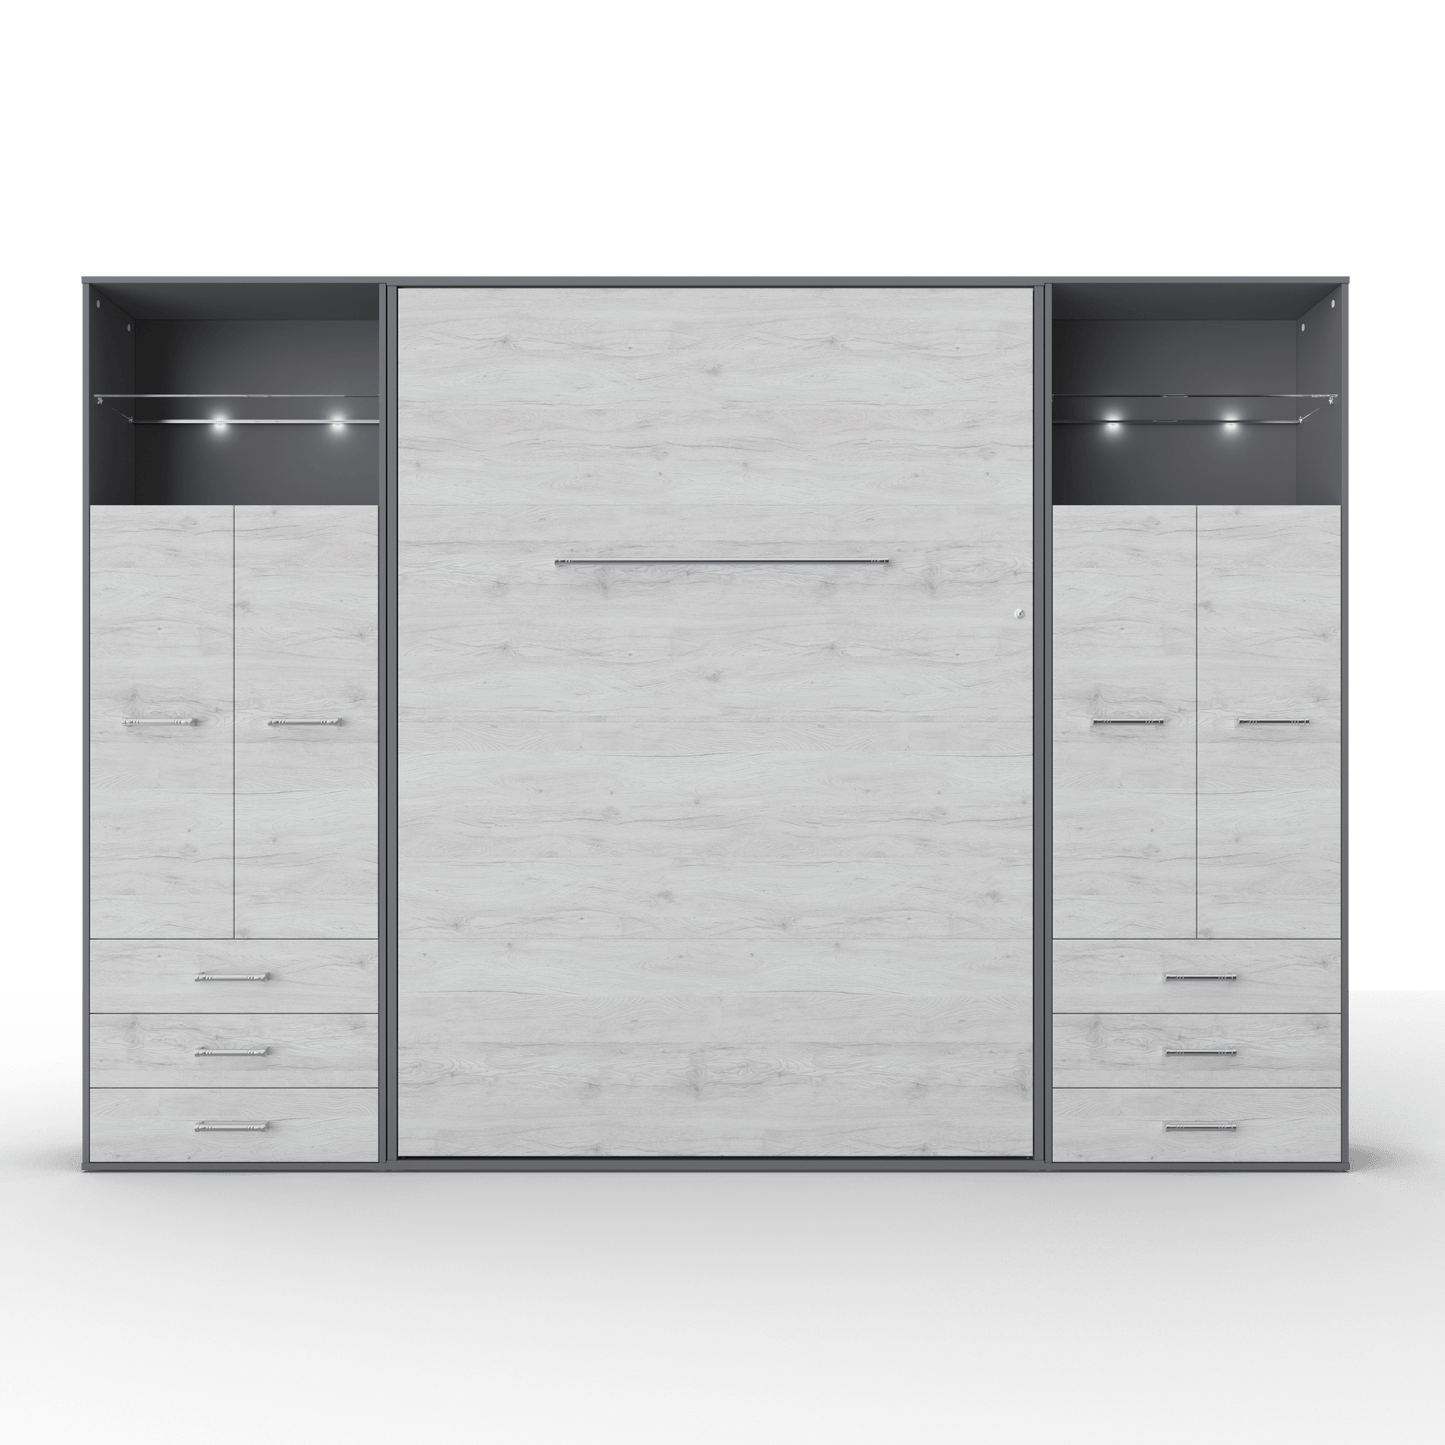 Maxima House Maxima House Vertical Murphy Bed Invento , European Full XL with 2 cabinets Grey/White Monaco IN140VLED-10GW